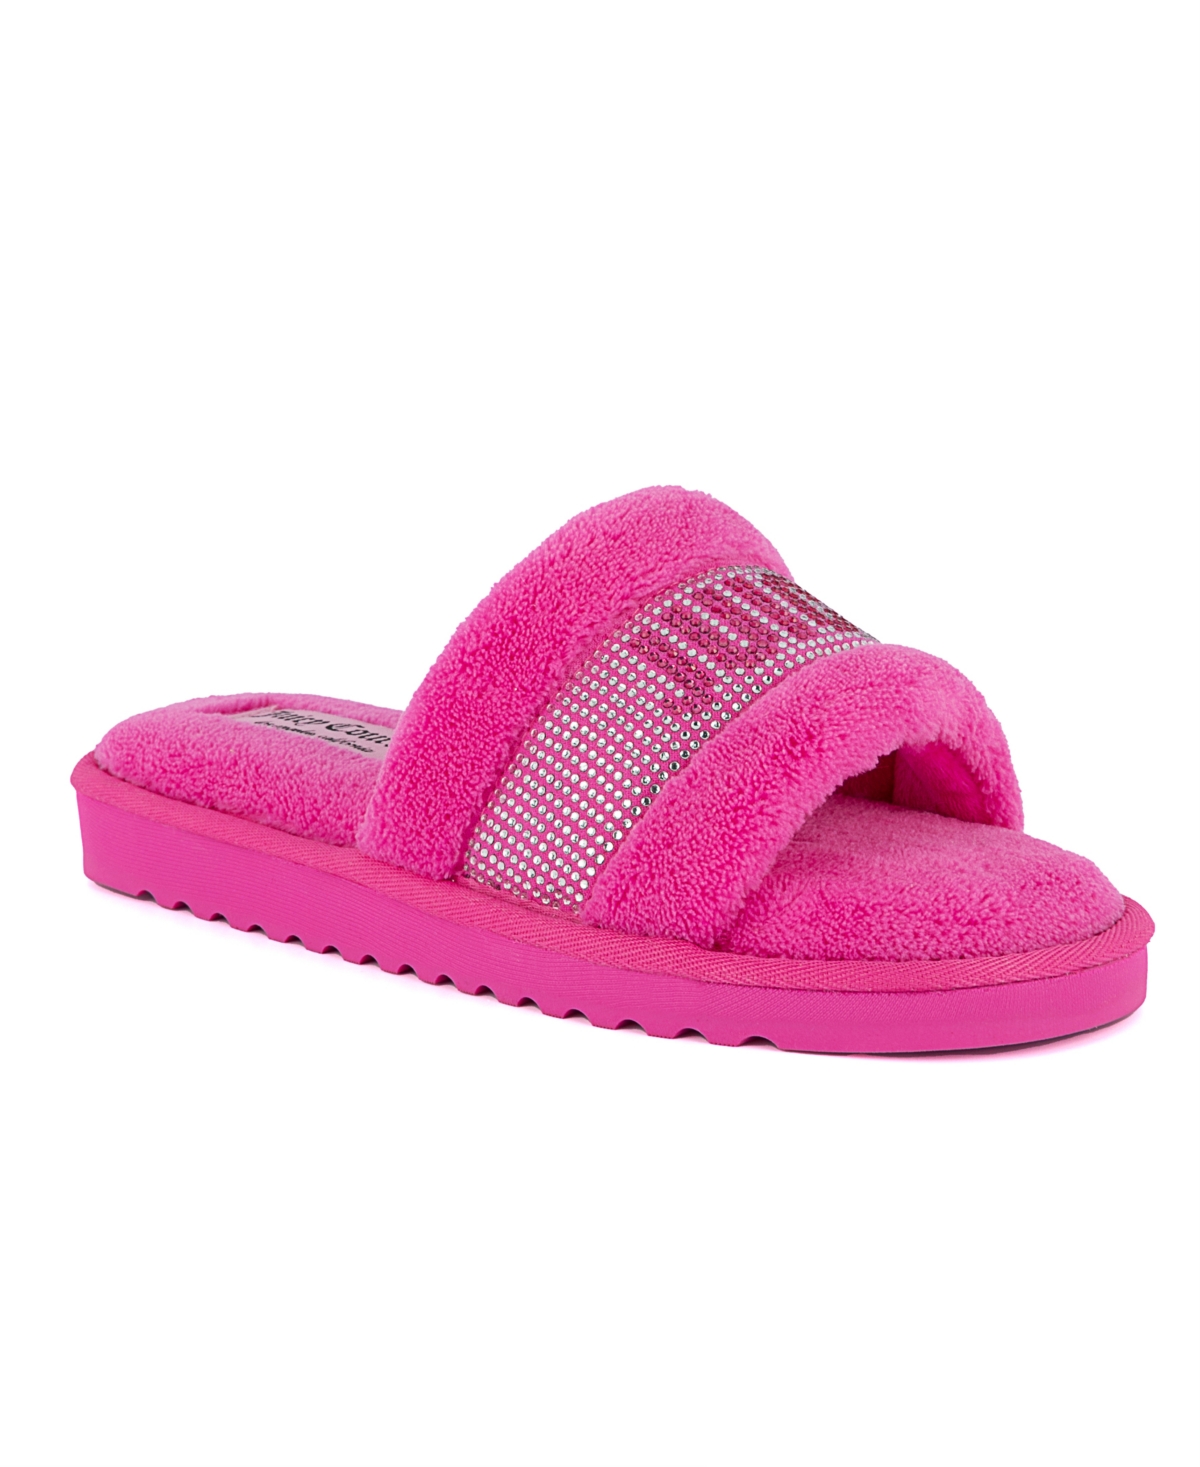 Shop Juicy Couture Women's Halo 2 Terry Slippers In Bright Pink